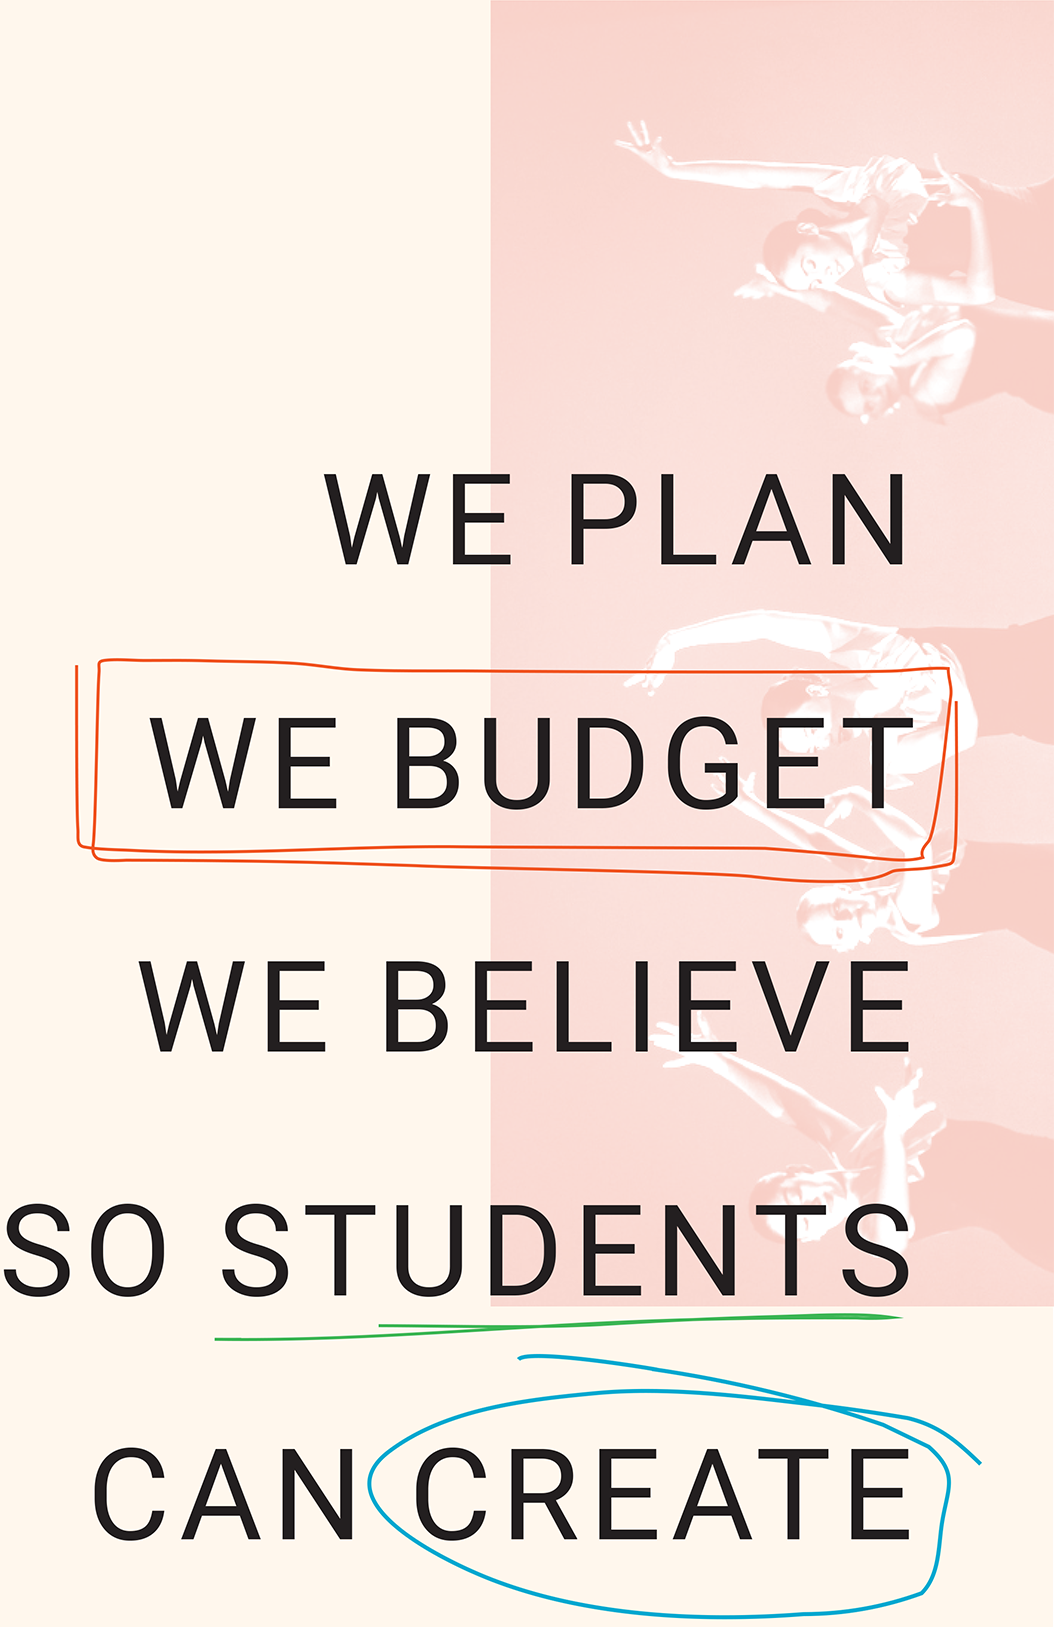 WE PLAN WE BUDGET WE BELIEVE SO STUDENTS CAN CREATE